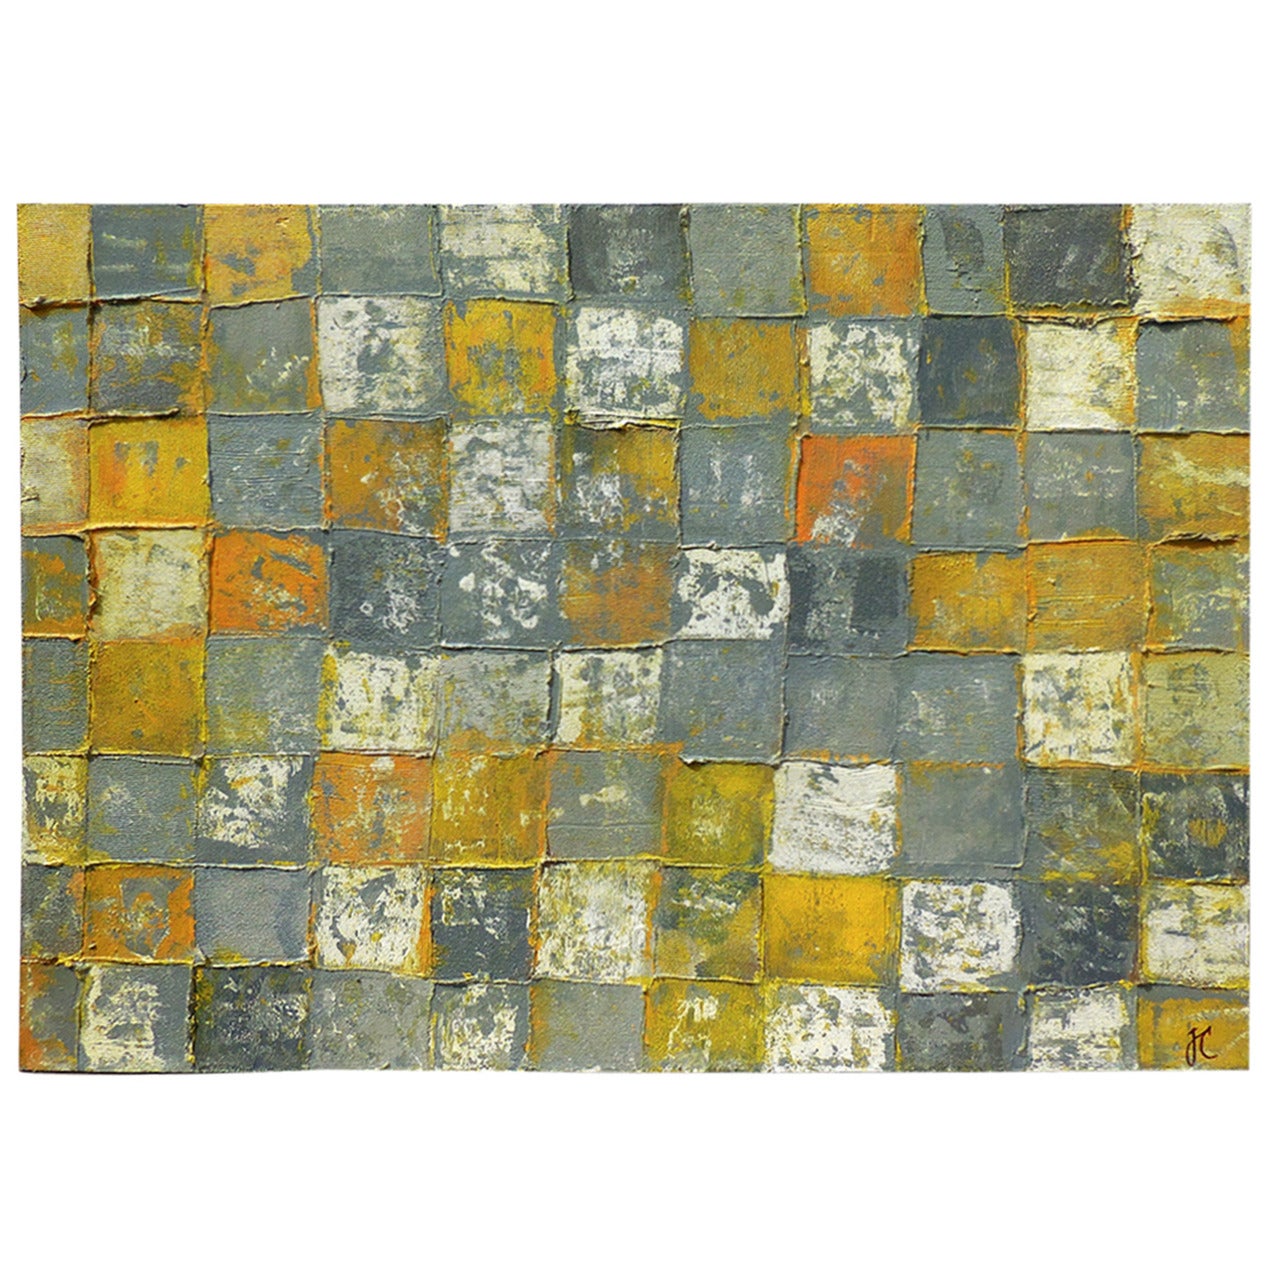 Large-Scale Whimsical Textured Geometric Abstract Acrylic on Canvas, circa 1980s